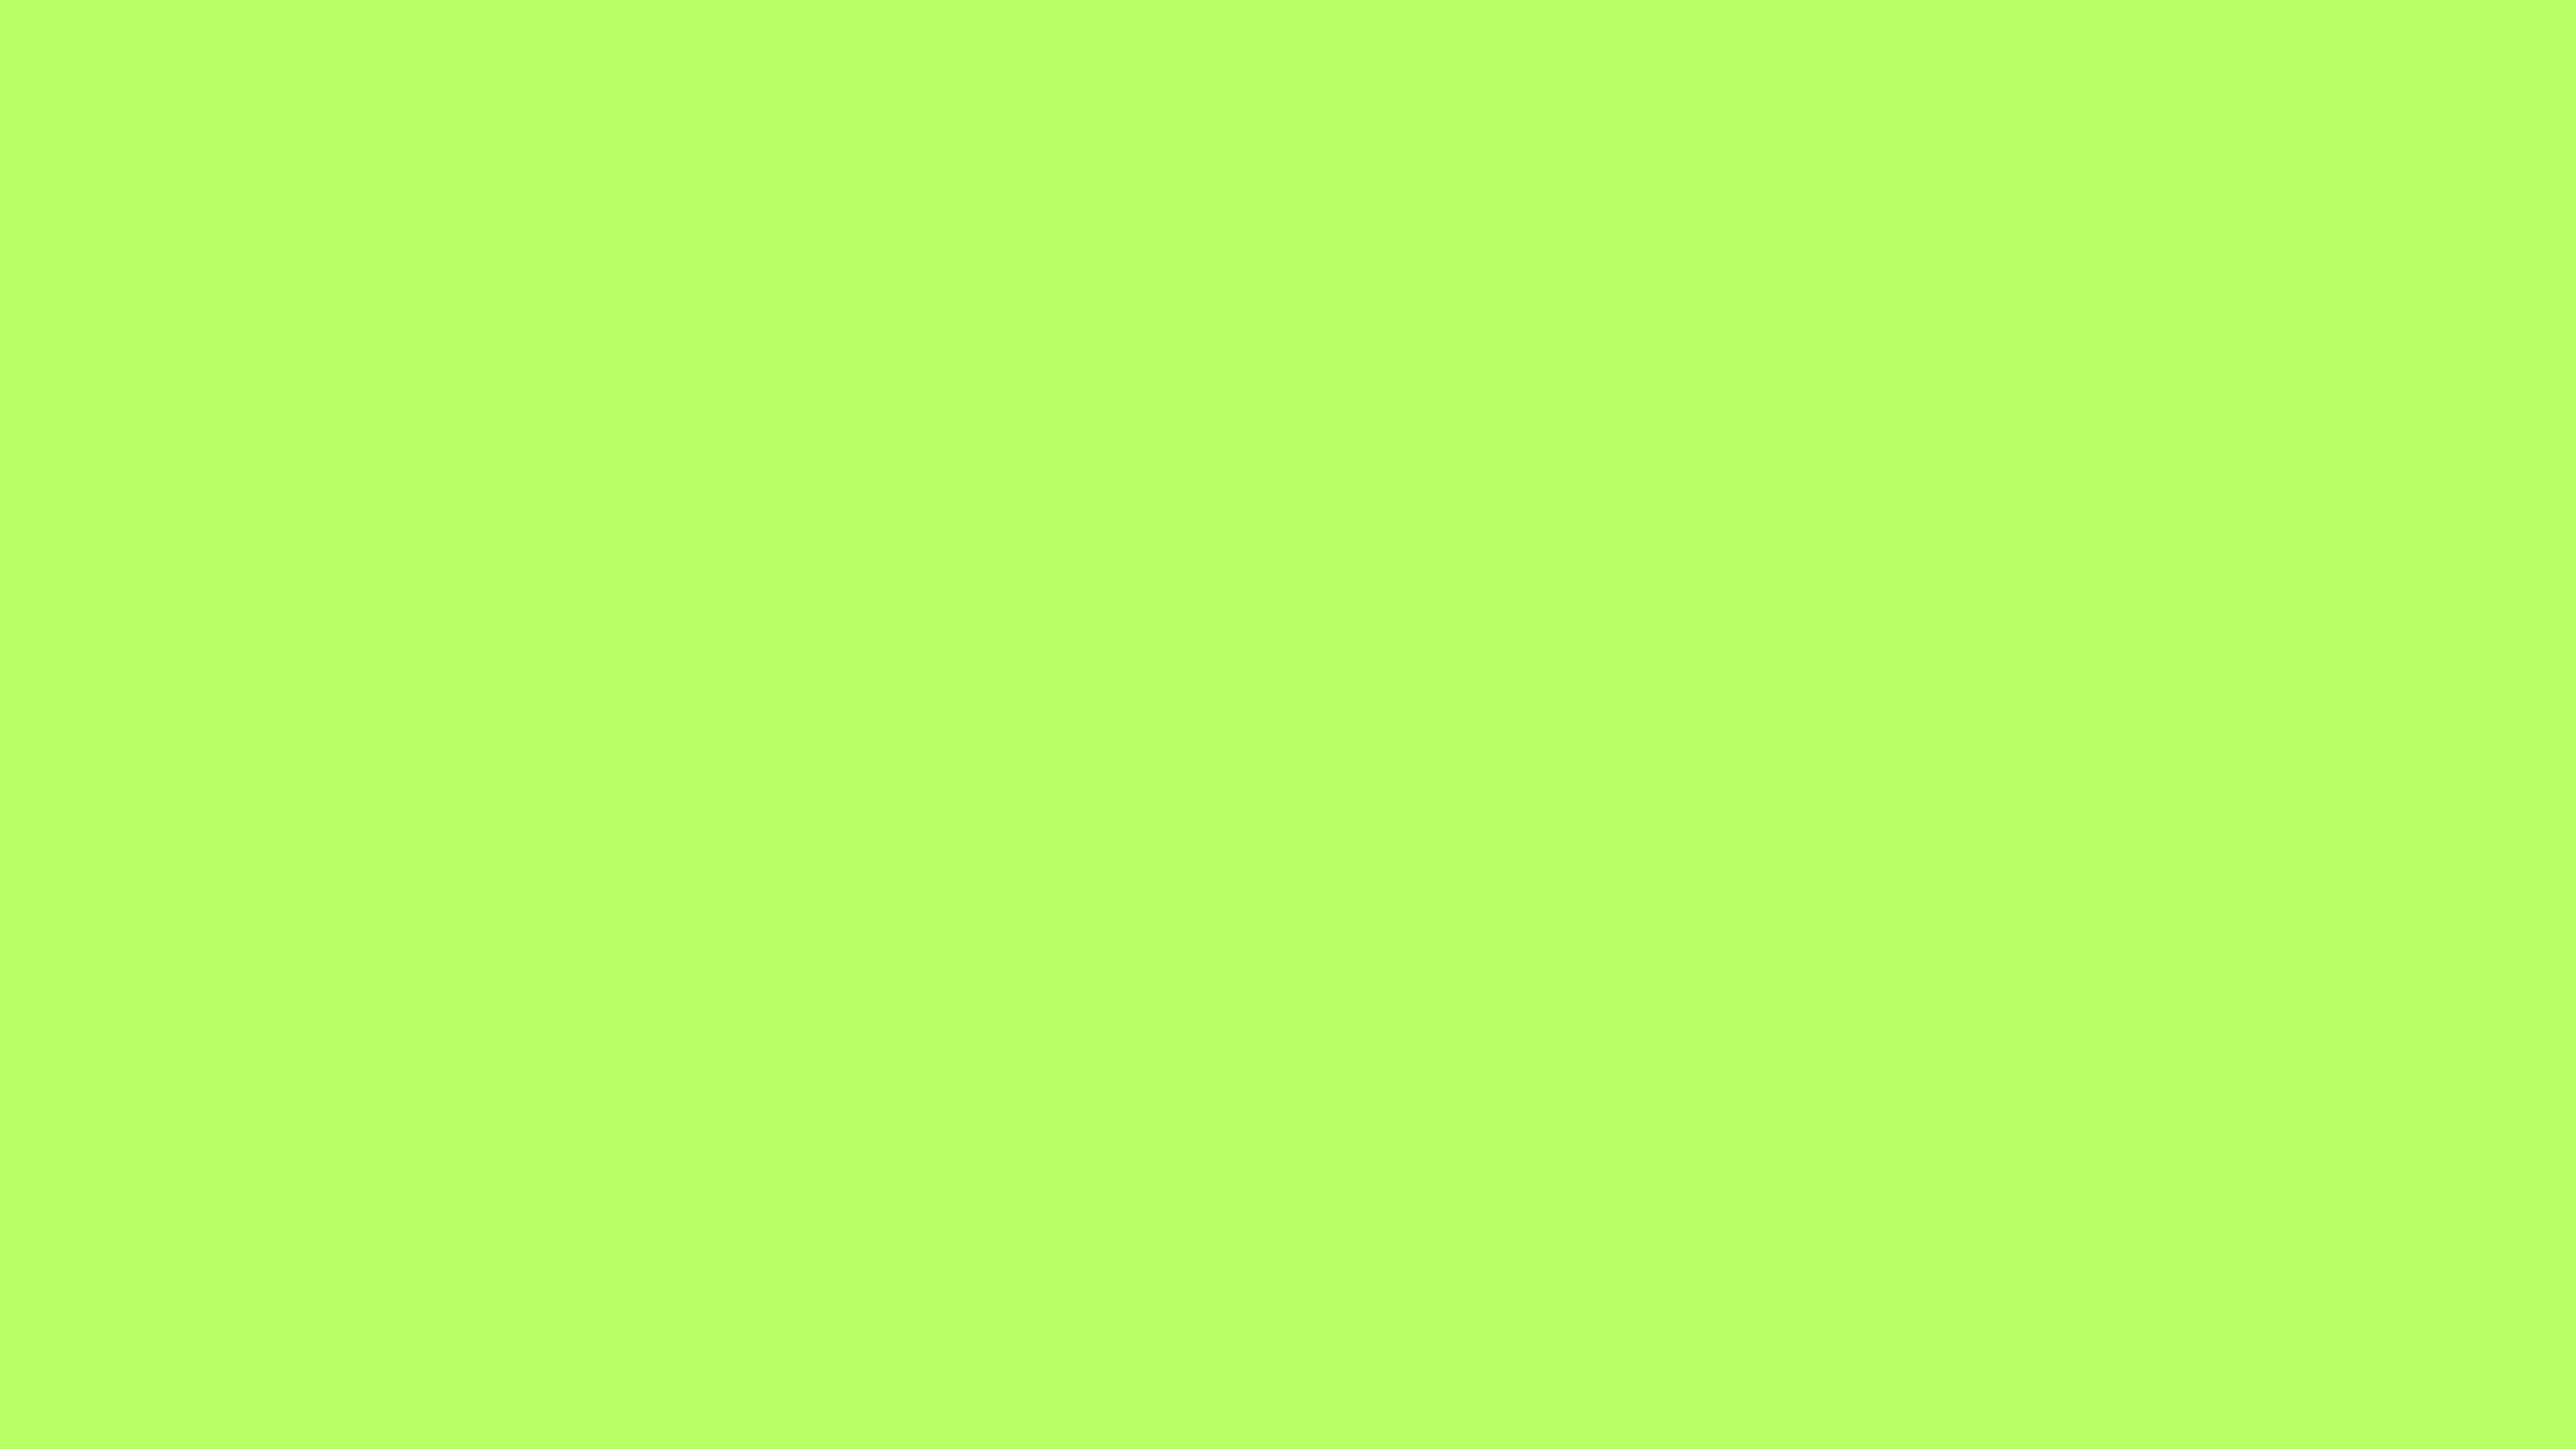 Light Lime Green Solid Color Background Image | Free Image Generator